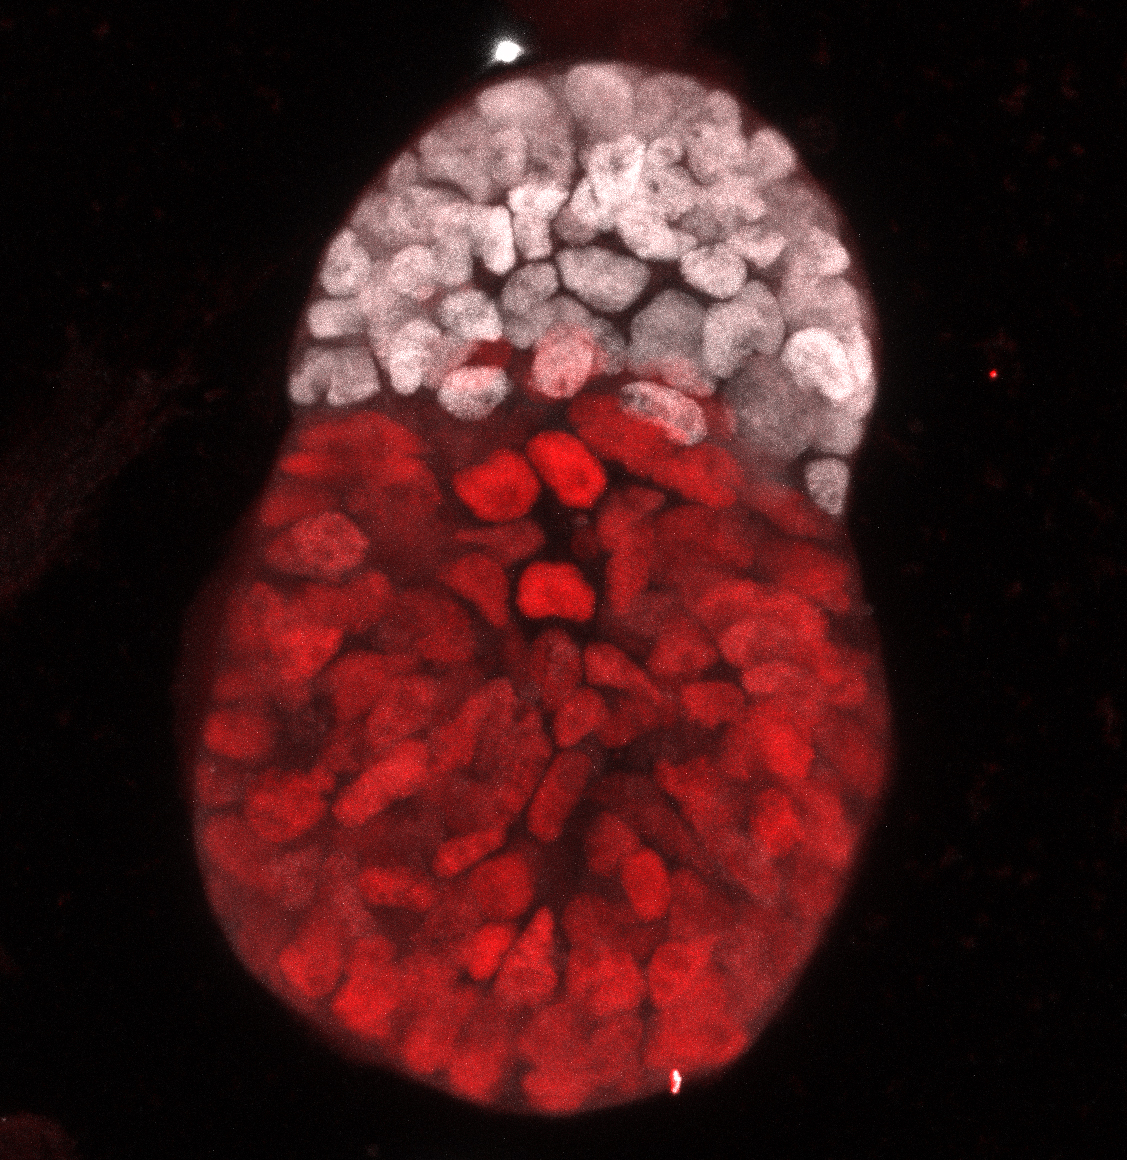 Synthetic Mouse Embryo made out of mouse embryonic and trophoblast stem cells